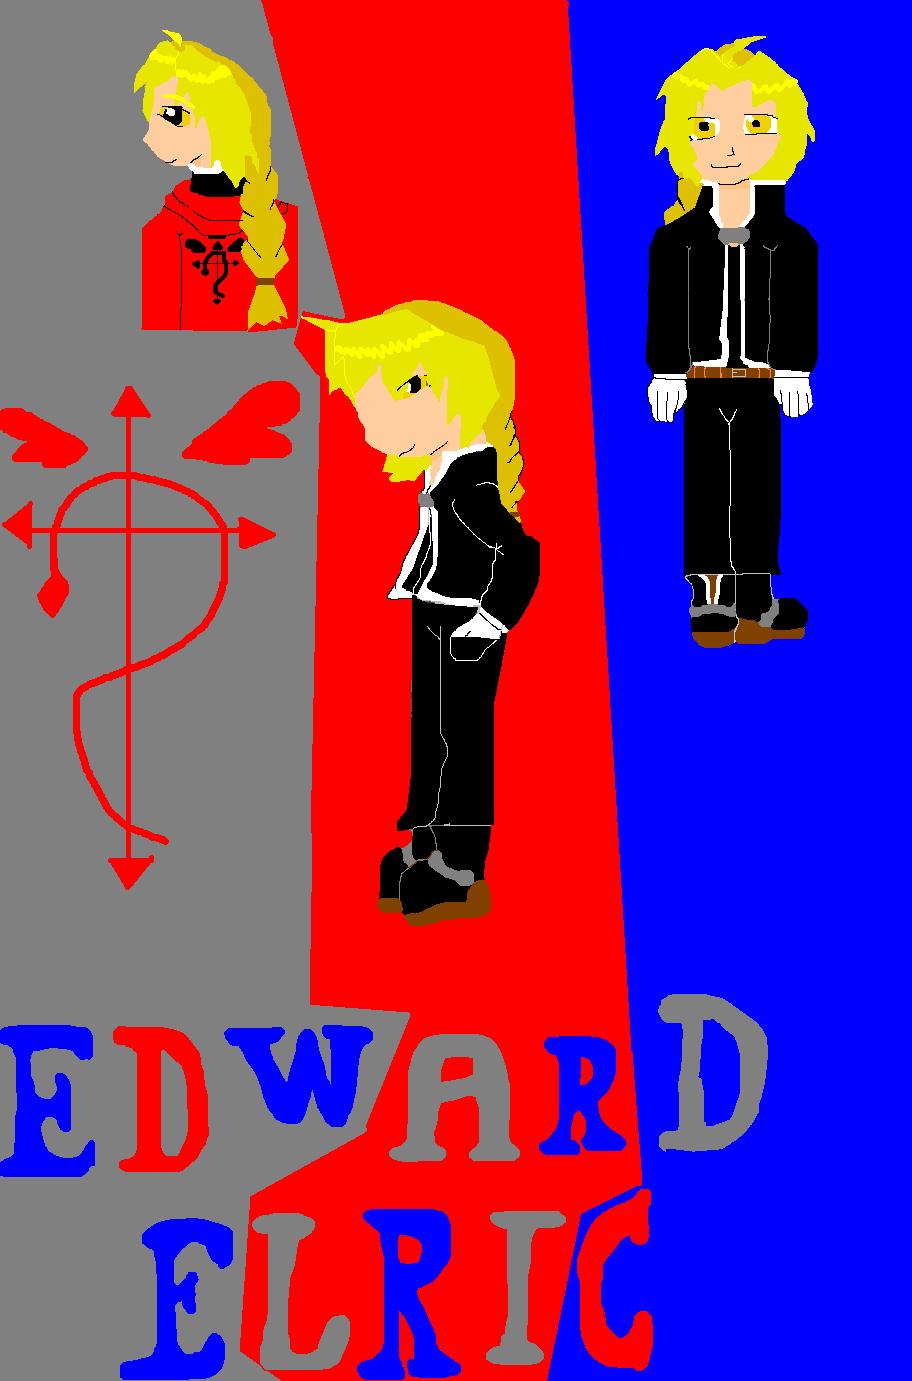 The Fullmetal Alchemist: Edward Elric by winged_wolf_of_the_sky